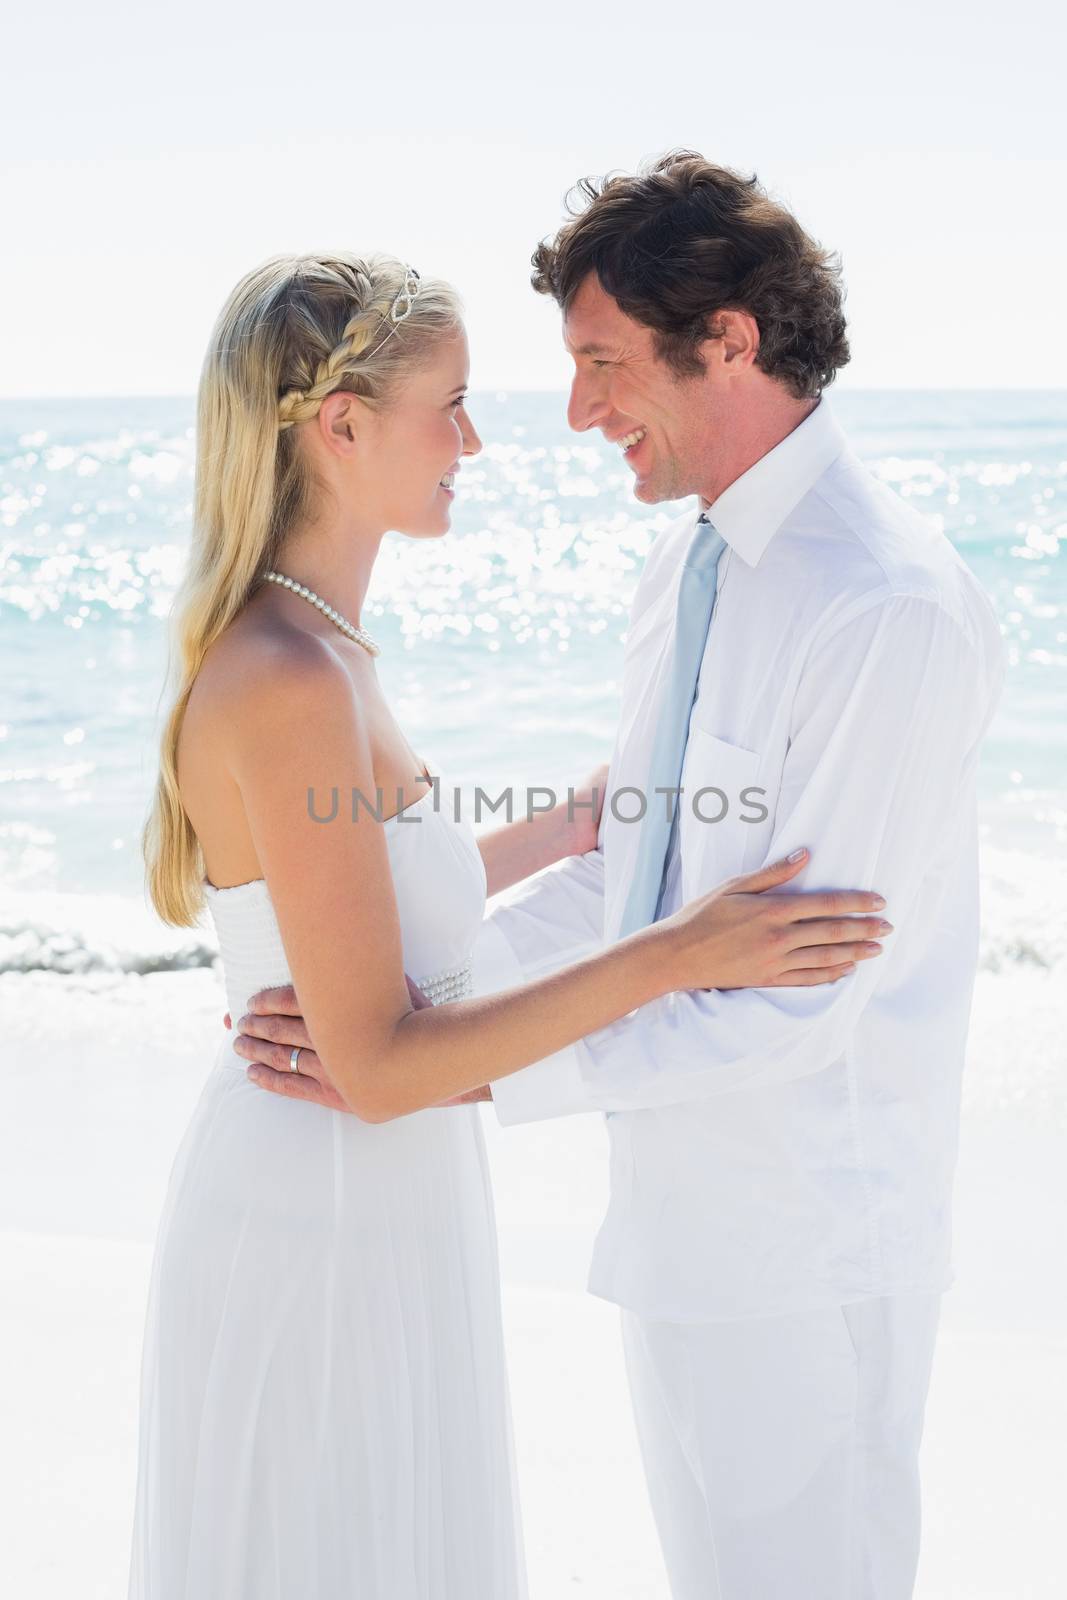 Romantic happy couple on their wedding day at the beach